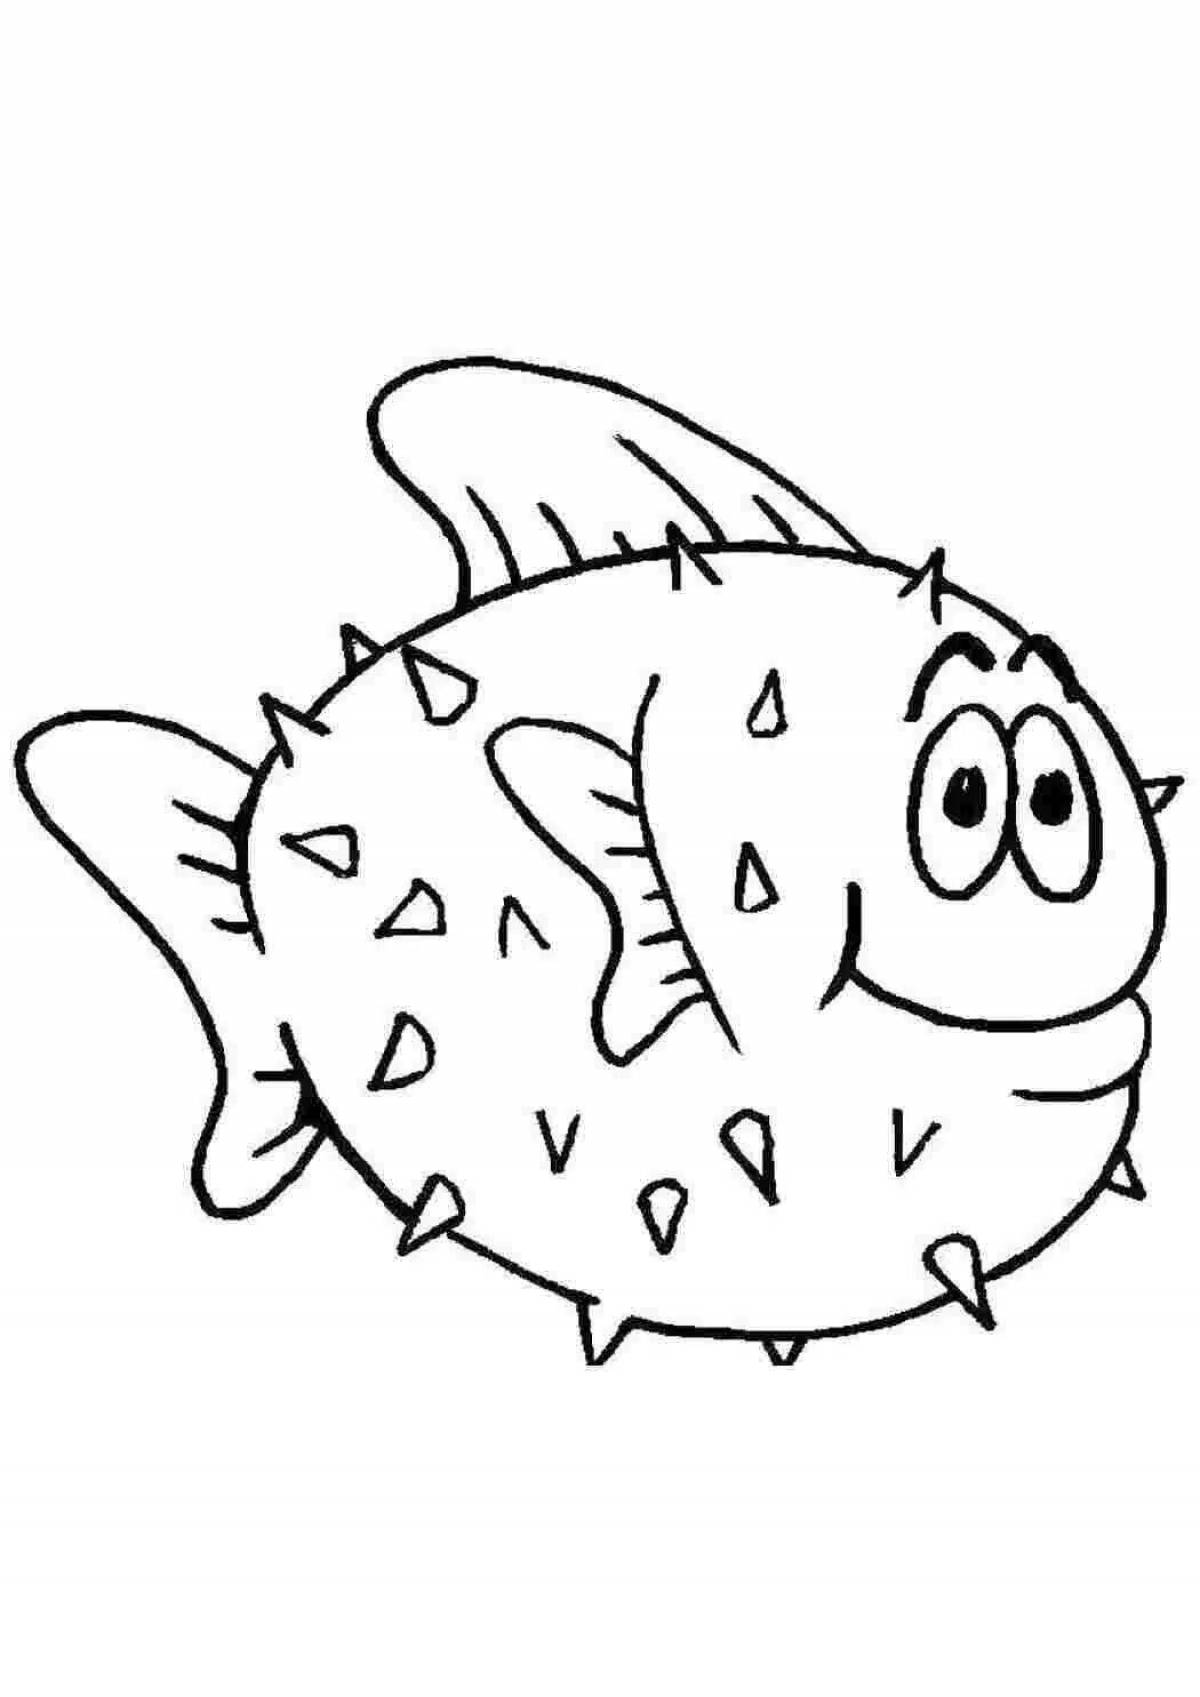 Attractive fish ball coloring page